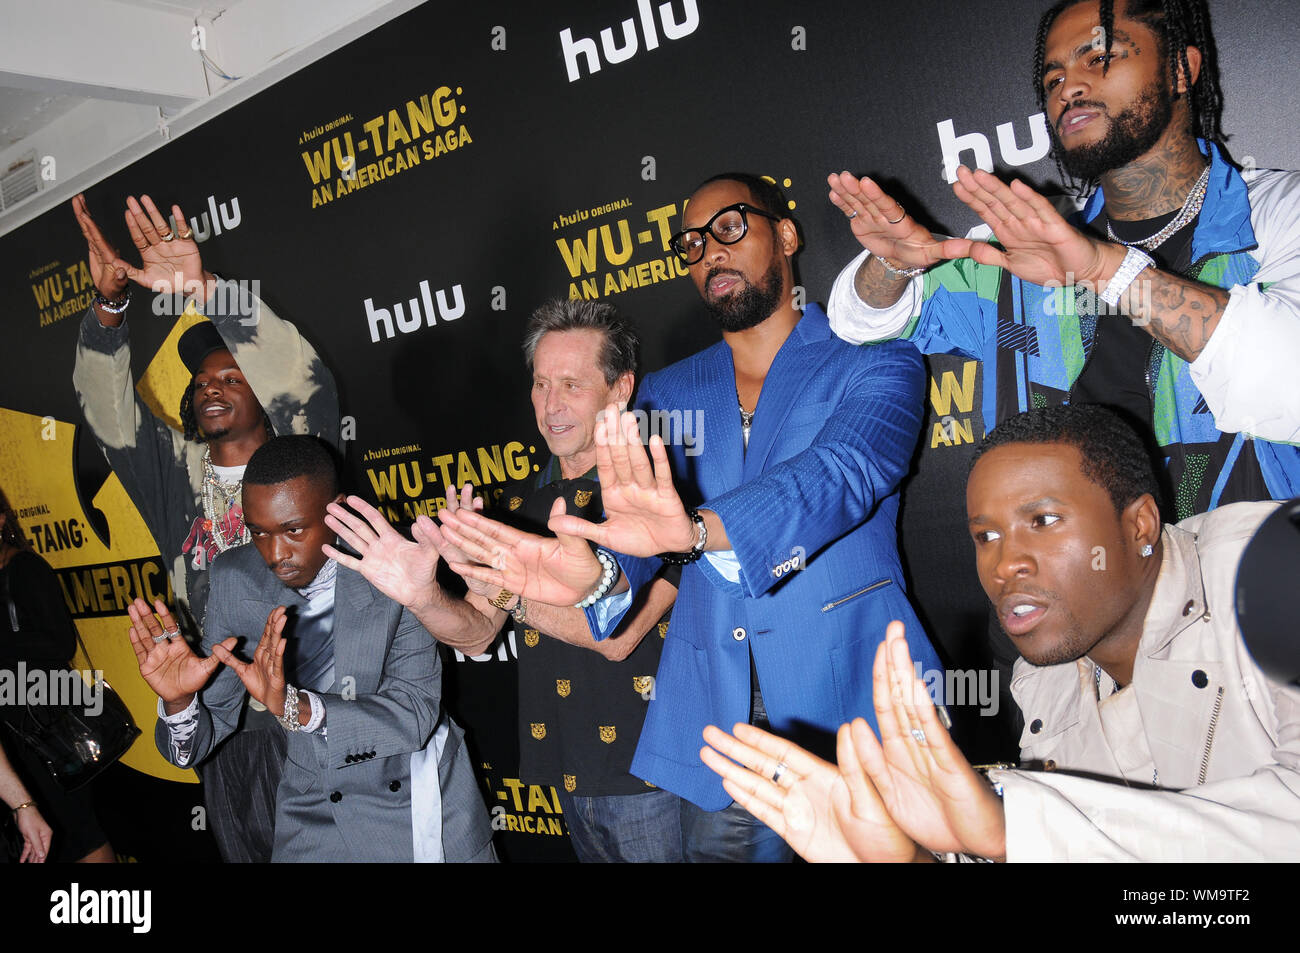 New York, United States. 05th Sep, 2019. (L-R) Joey Badass (Jo-Vaughn Virginie Scott), Ashton Sanders, Brian Grazer, RZA (Robert Fitzgerald Diggs), Dave East (David Brewster Jr.) and Shameik Moore attend the Wu-Tang: An American Saga premiere held at Metrograph in New York City. Credit: SOPA Images Limited/Alamy Live News Stock Photo